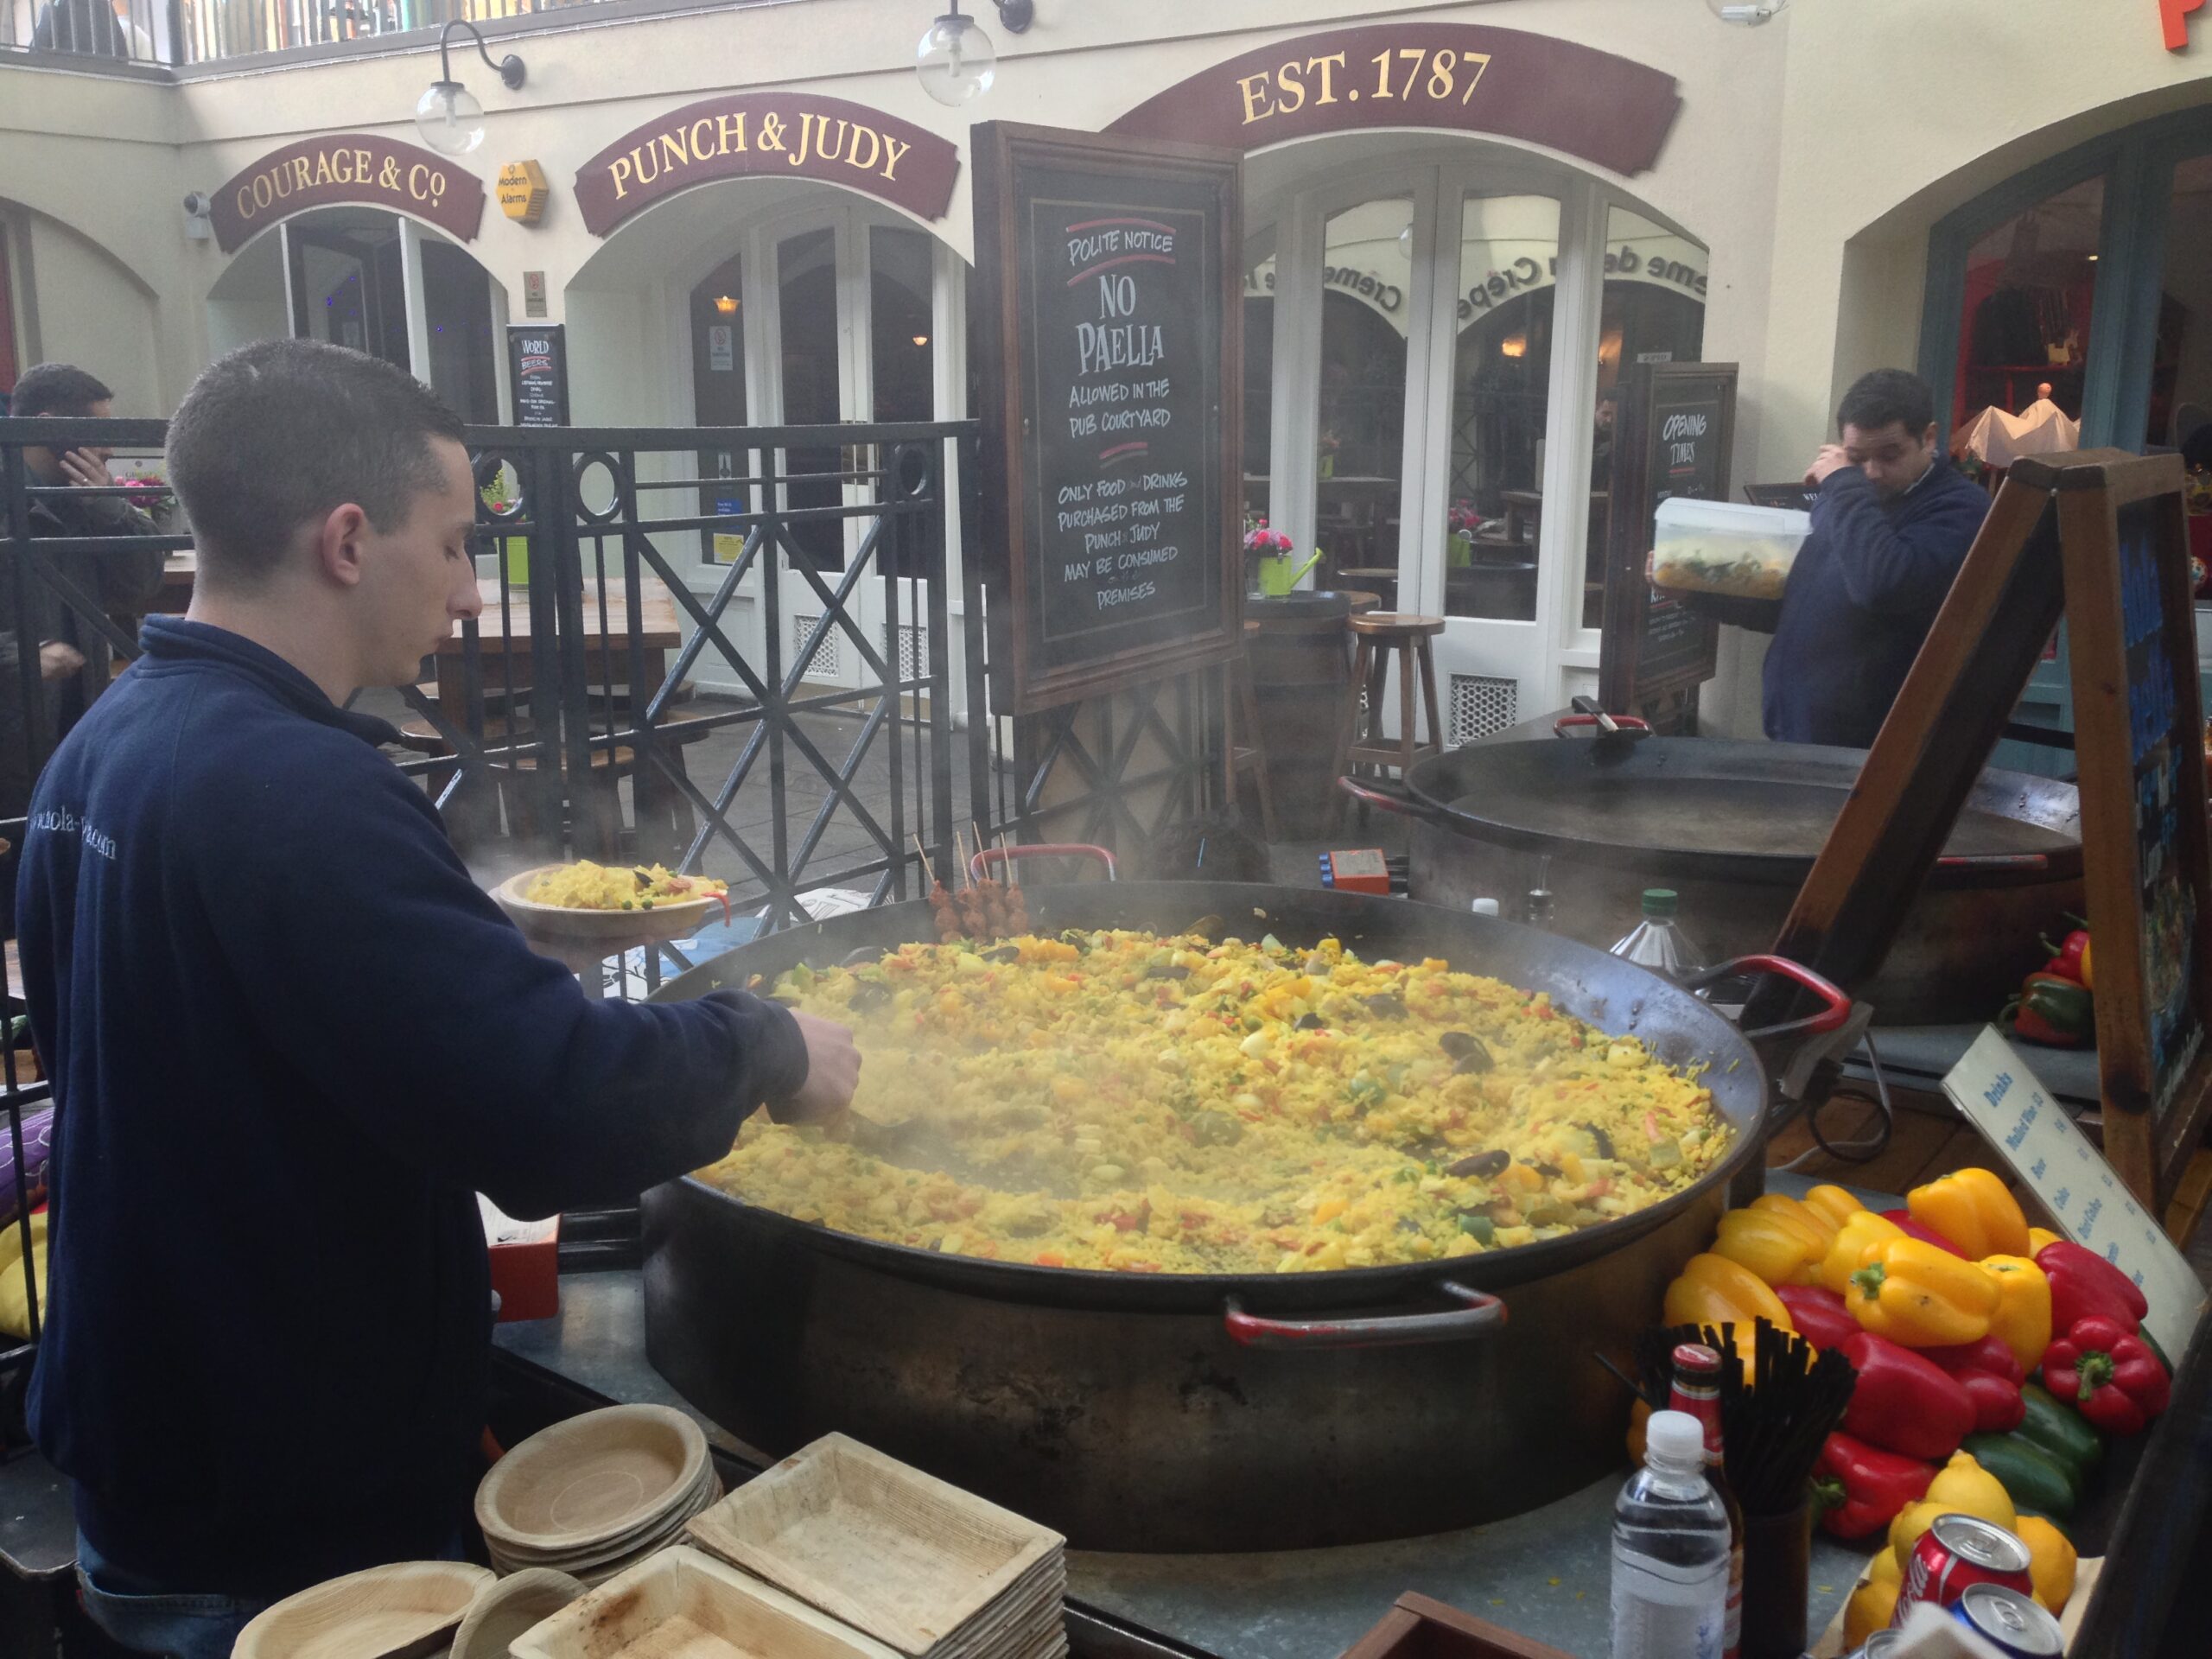 A man makes paella at Covent Garden Marker in London.